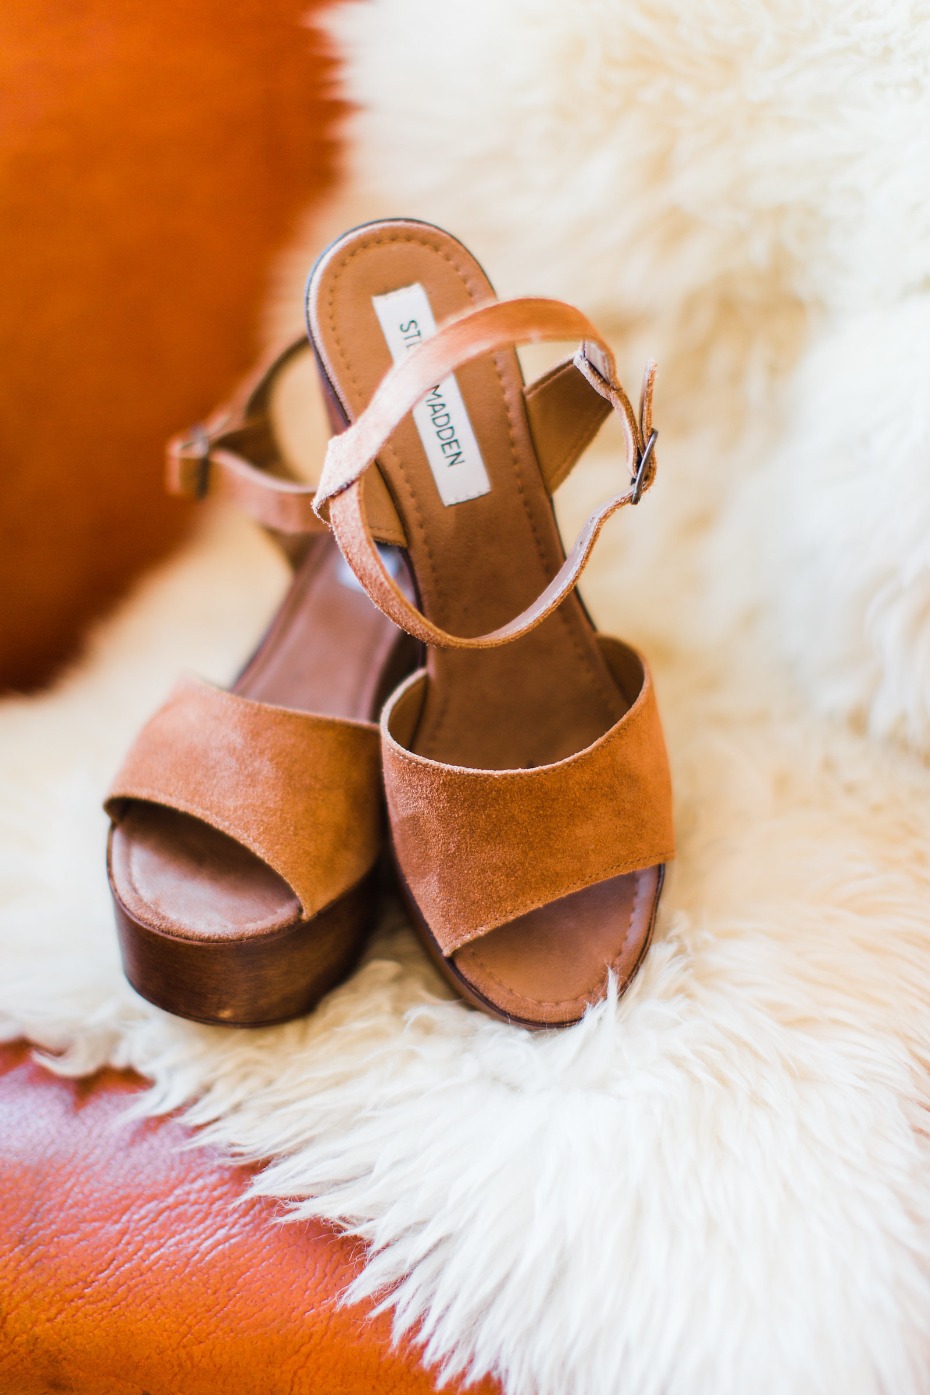 Leather and wood Steve Madden's for the bride